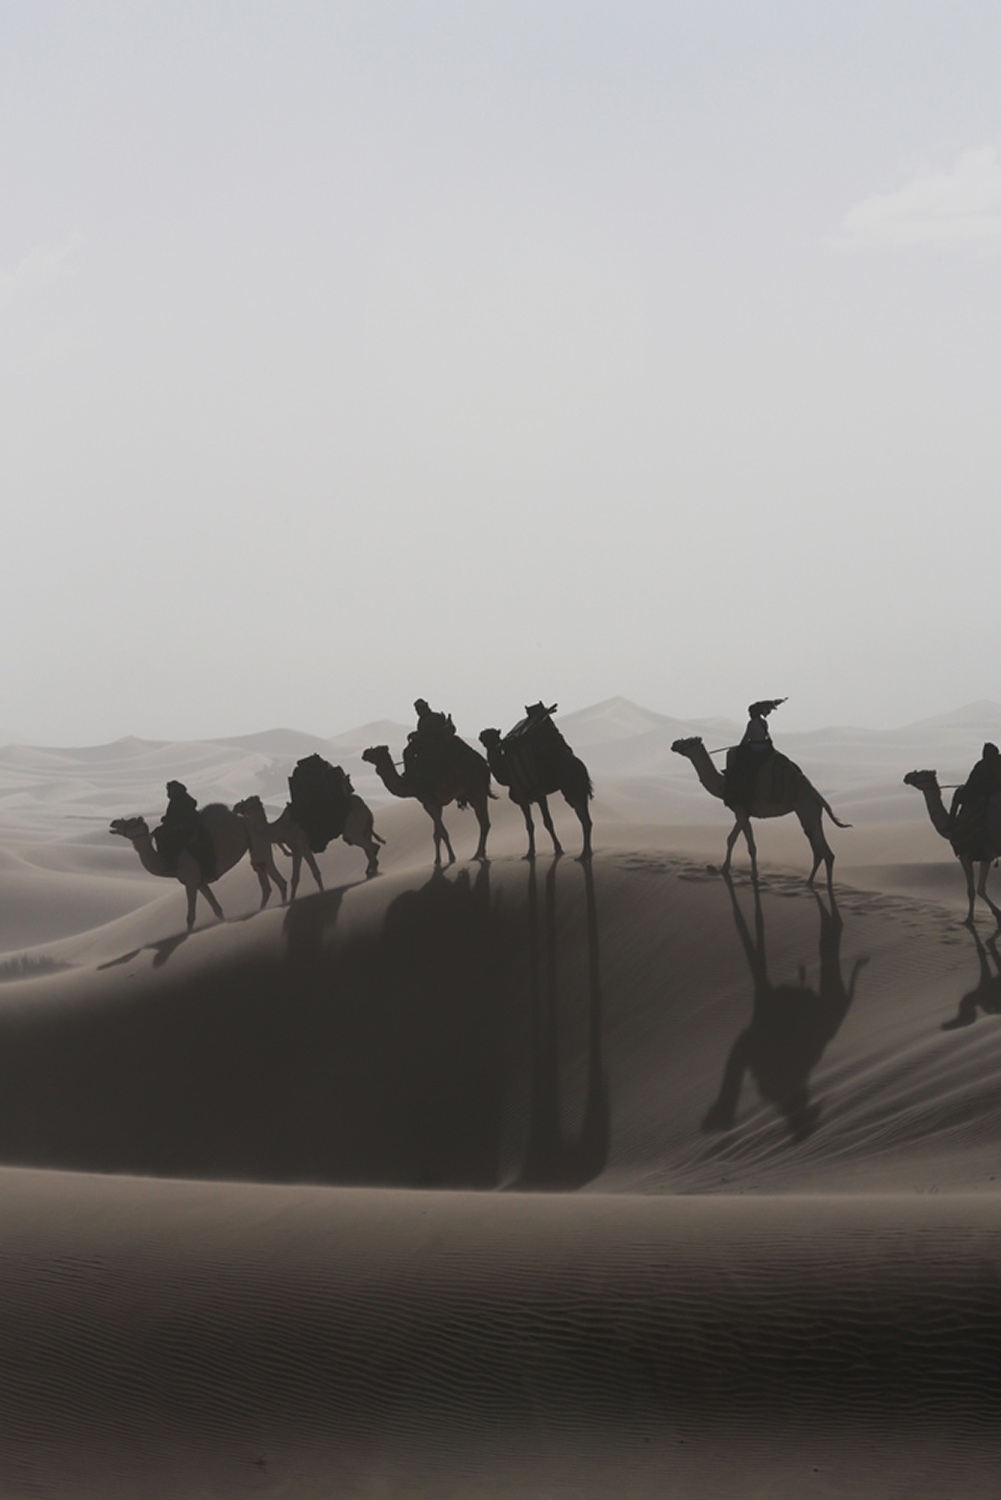 Six camels are ridden through the desert, they stand on the slope of a dune and the sun casts the shadows into the valley.